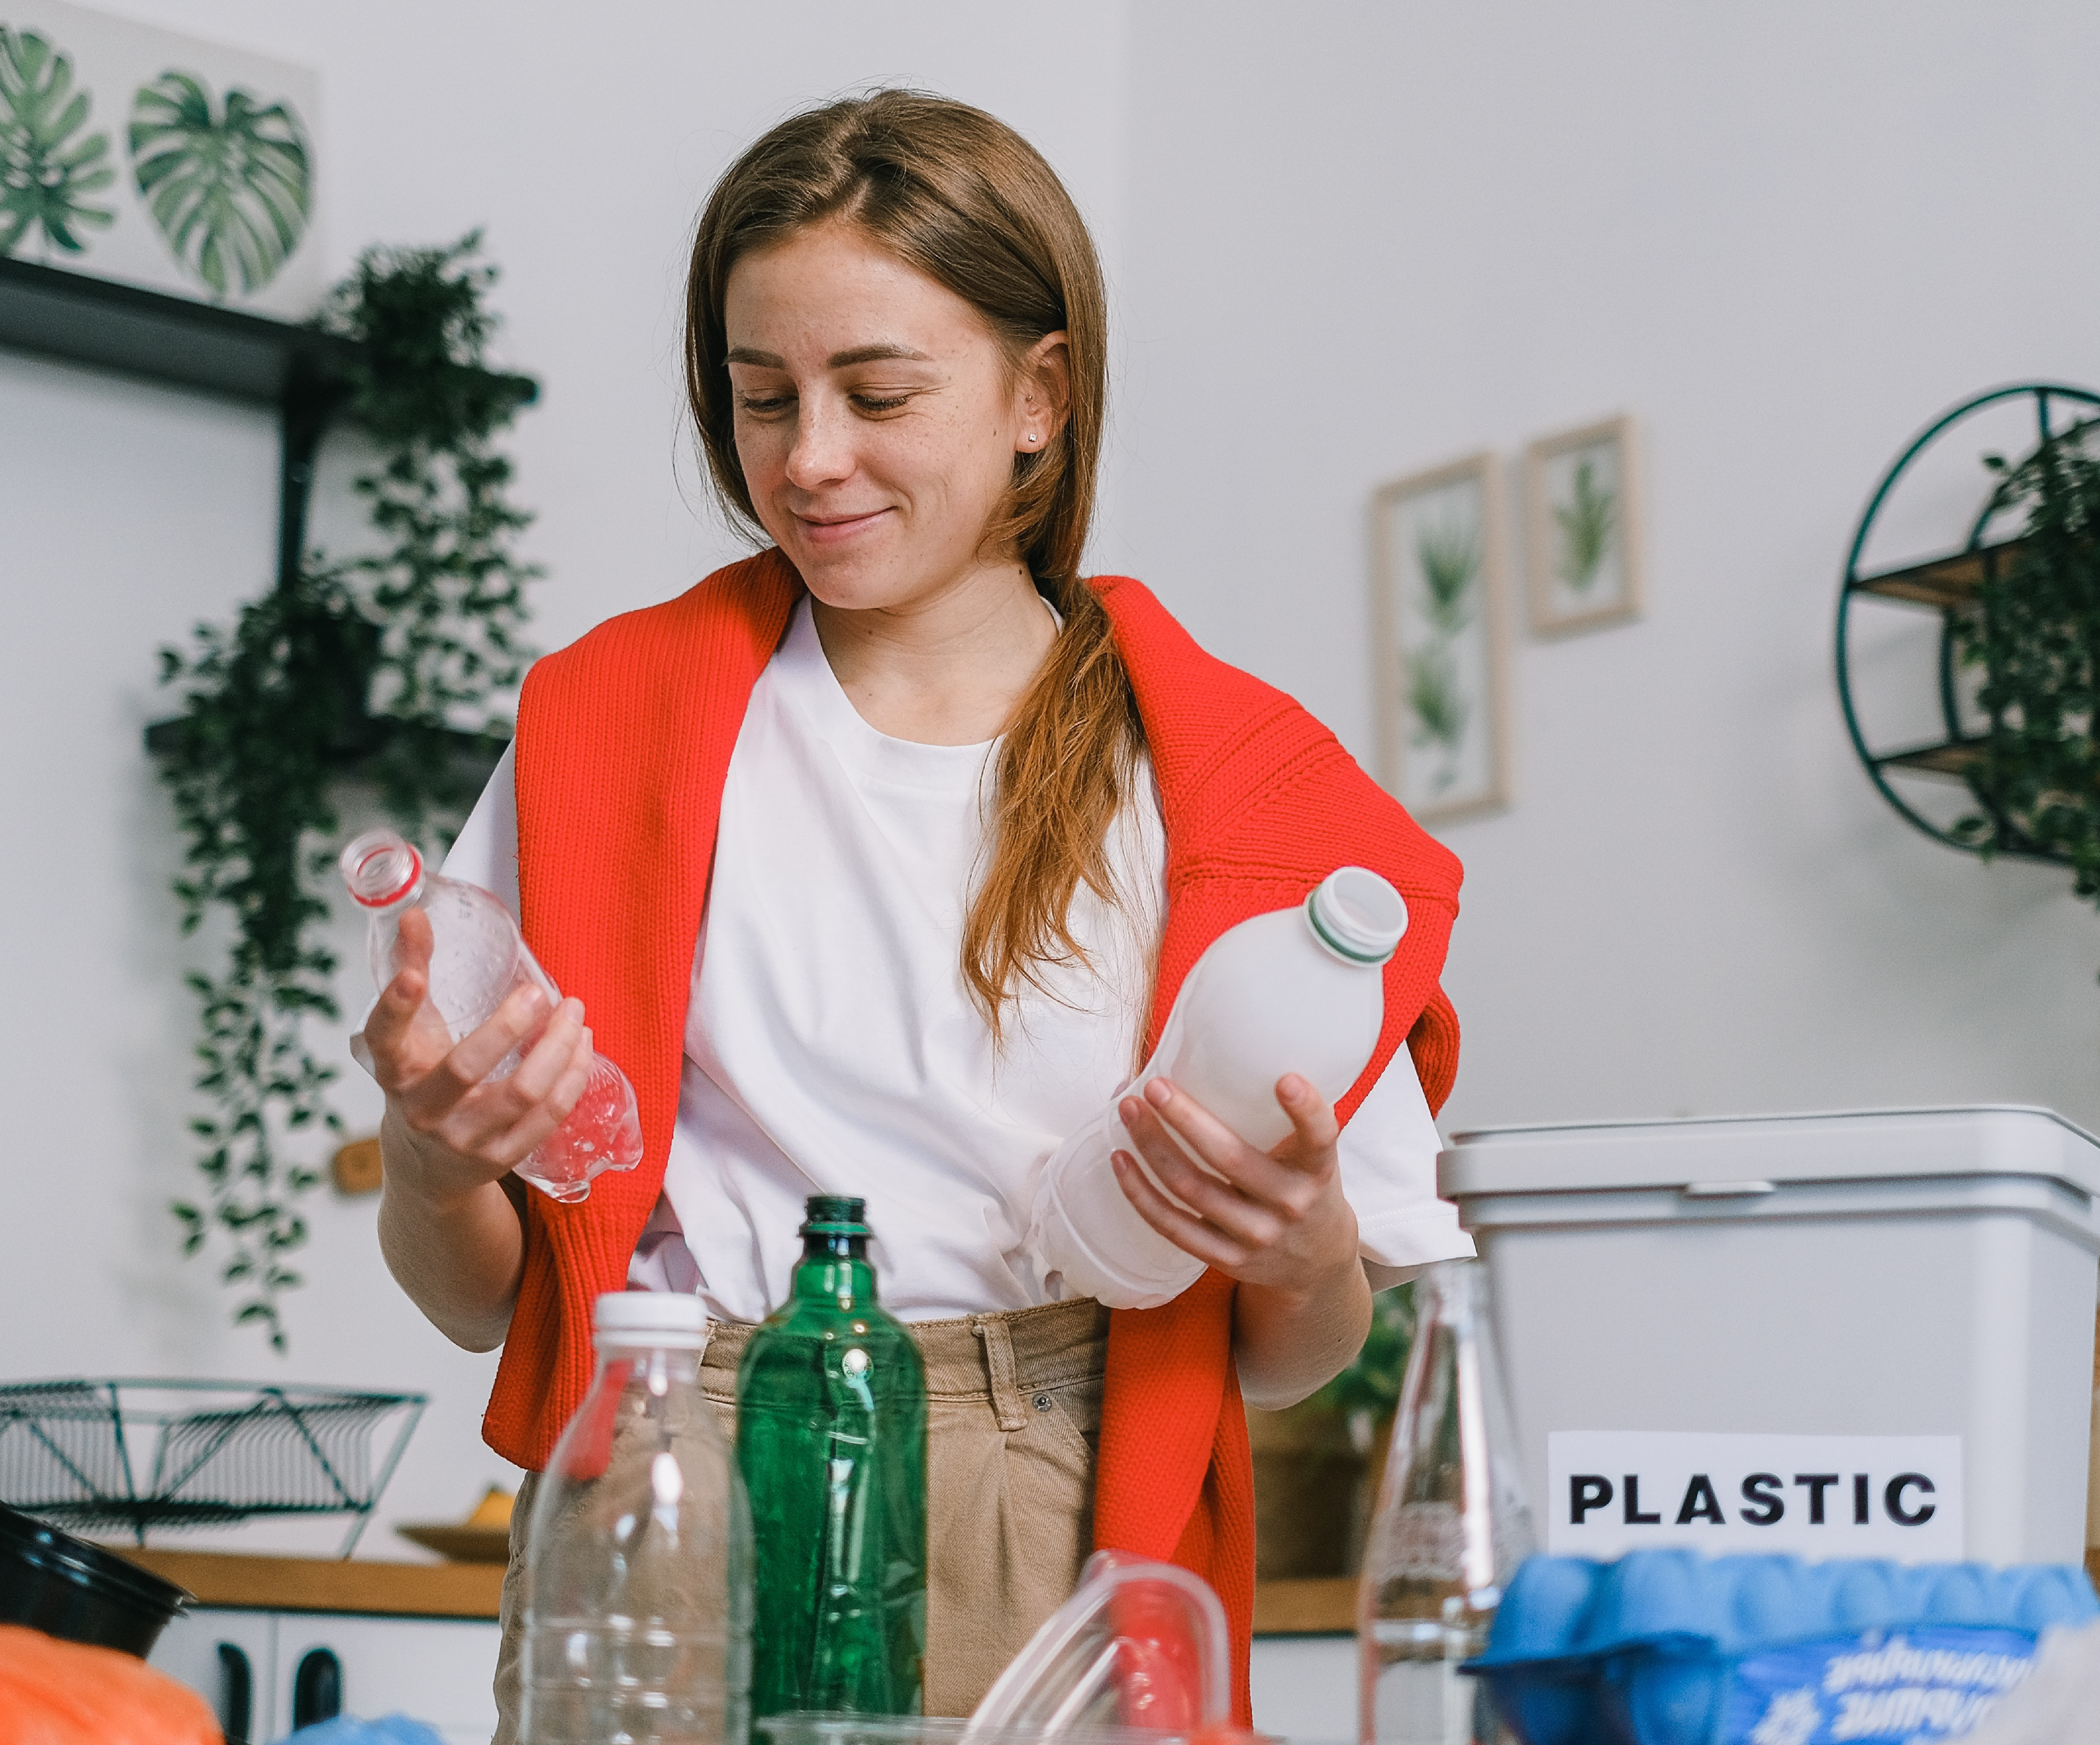 Woman recycling plastic in home kitchen